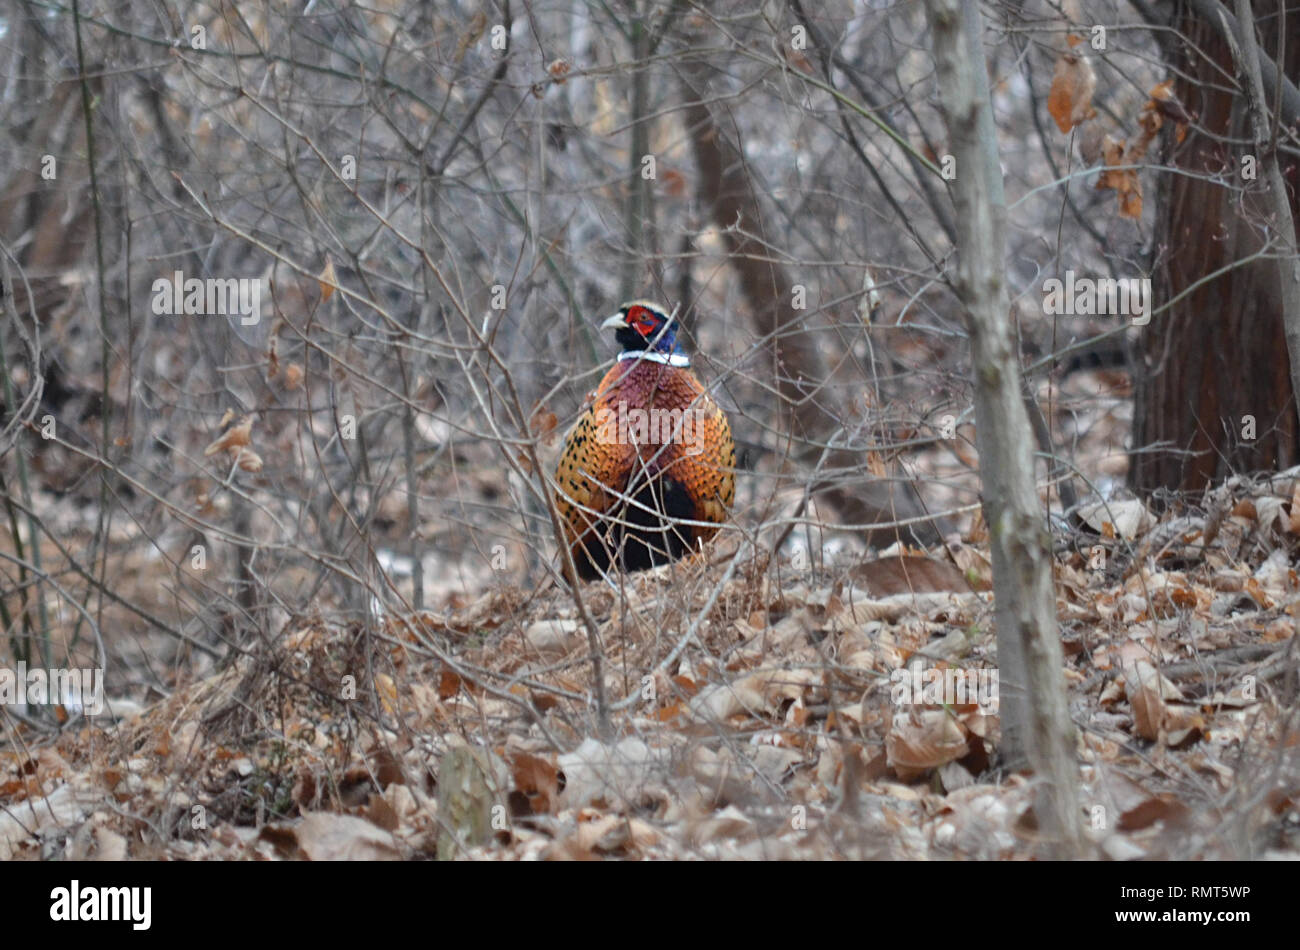 COMMON RING NECKED PHEASANT PHASIANUS COLCHICUS MALE BIRD IN WOODS TREES Stock Photo